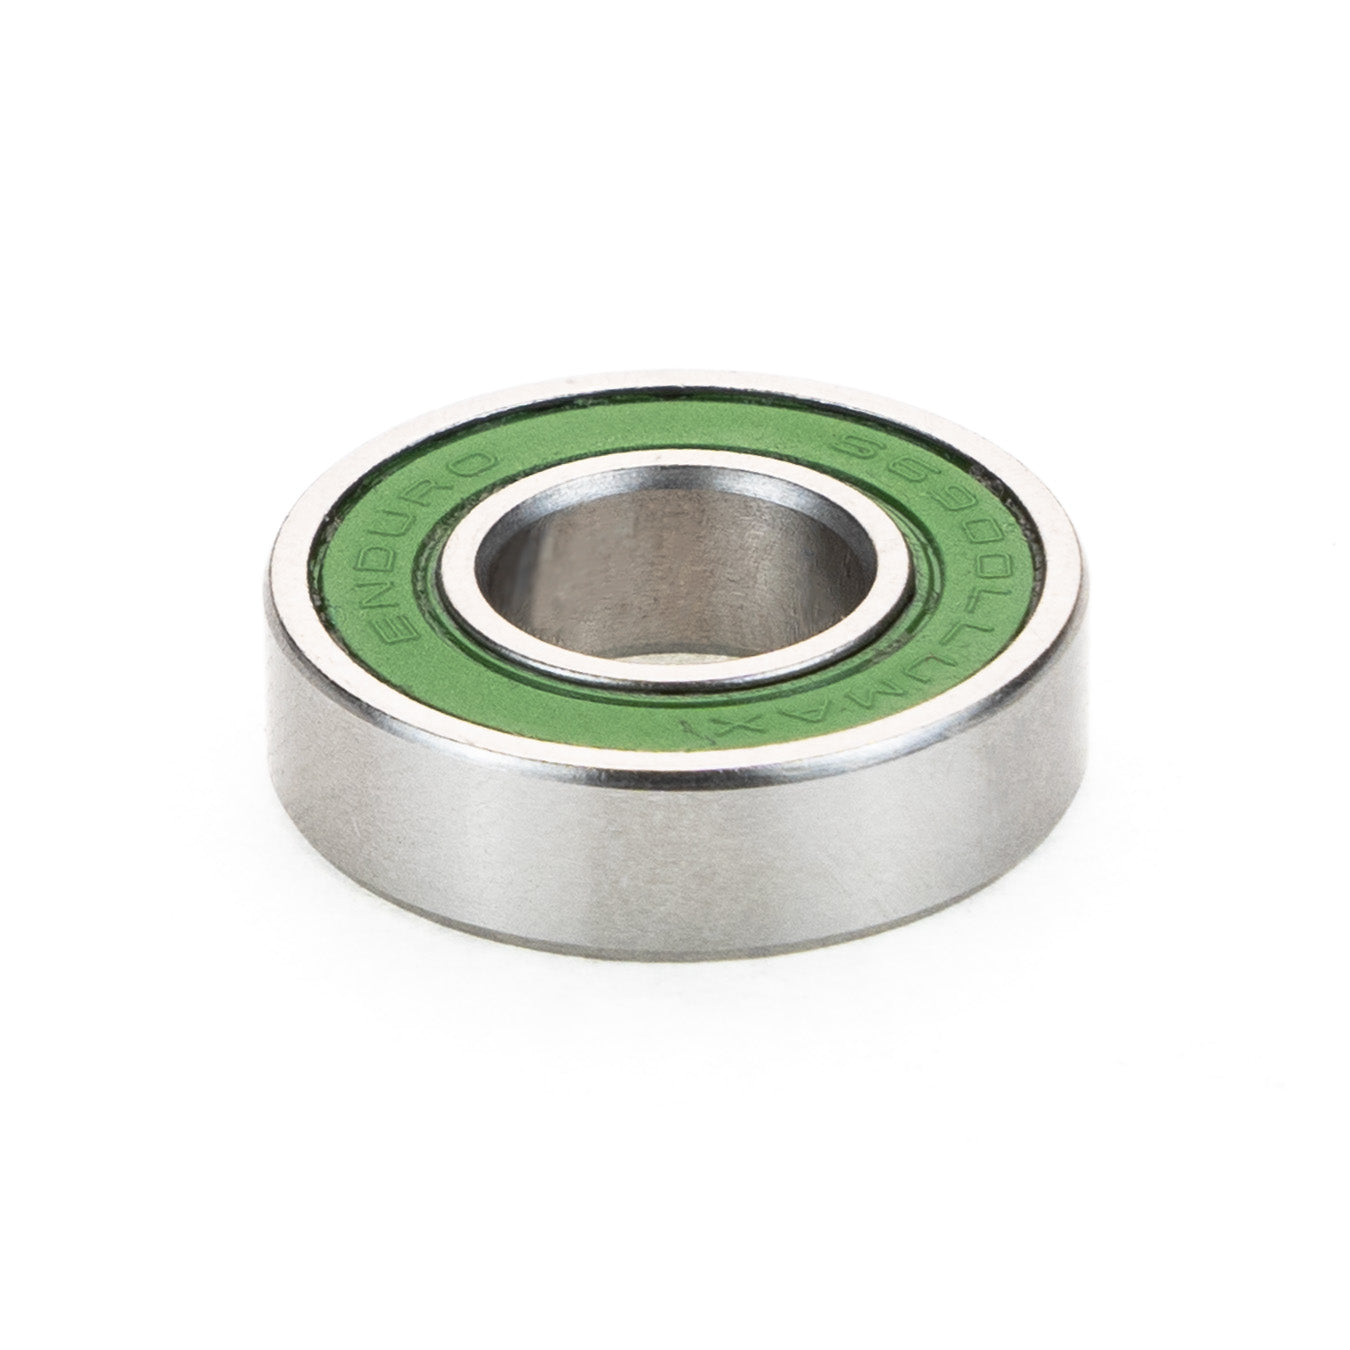 S6900 LLB - Stainless Steel Radial Bearing (C3 Clearance) - 10mm x 22mm x 6mm